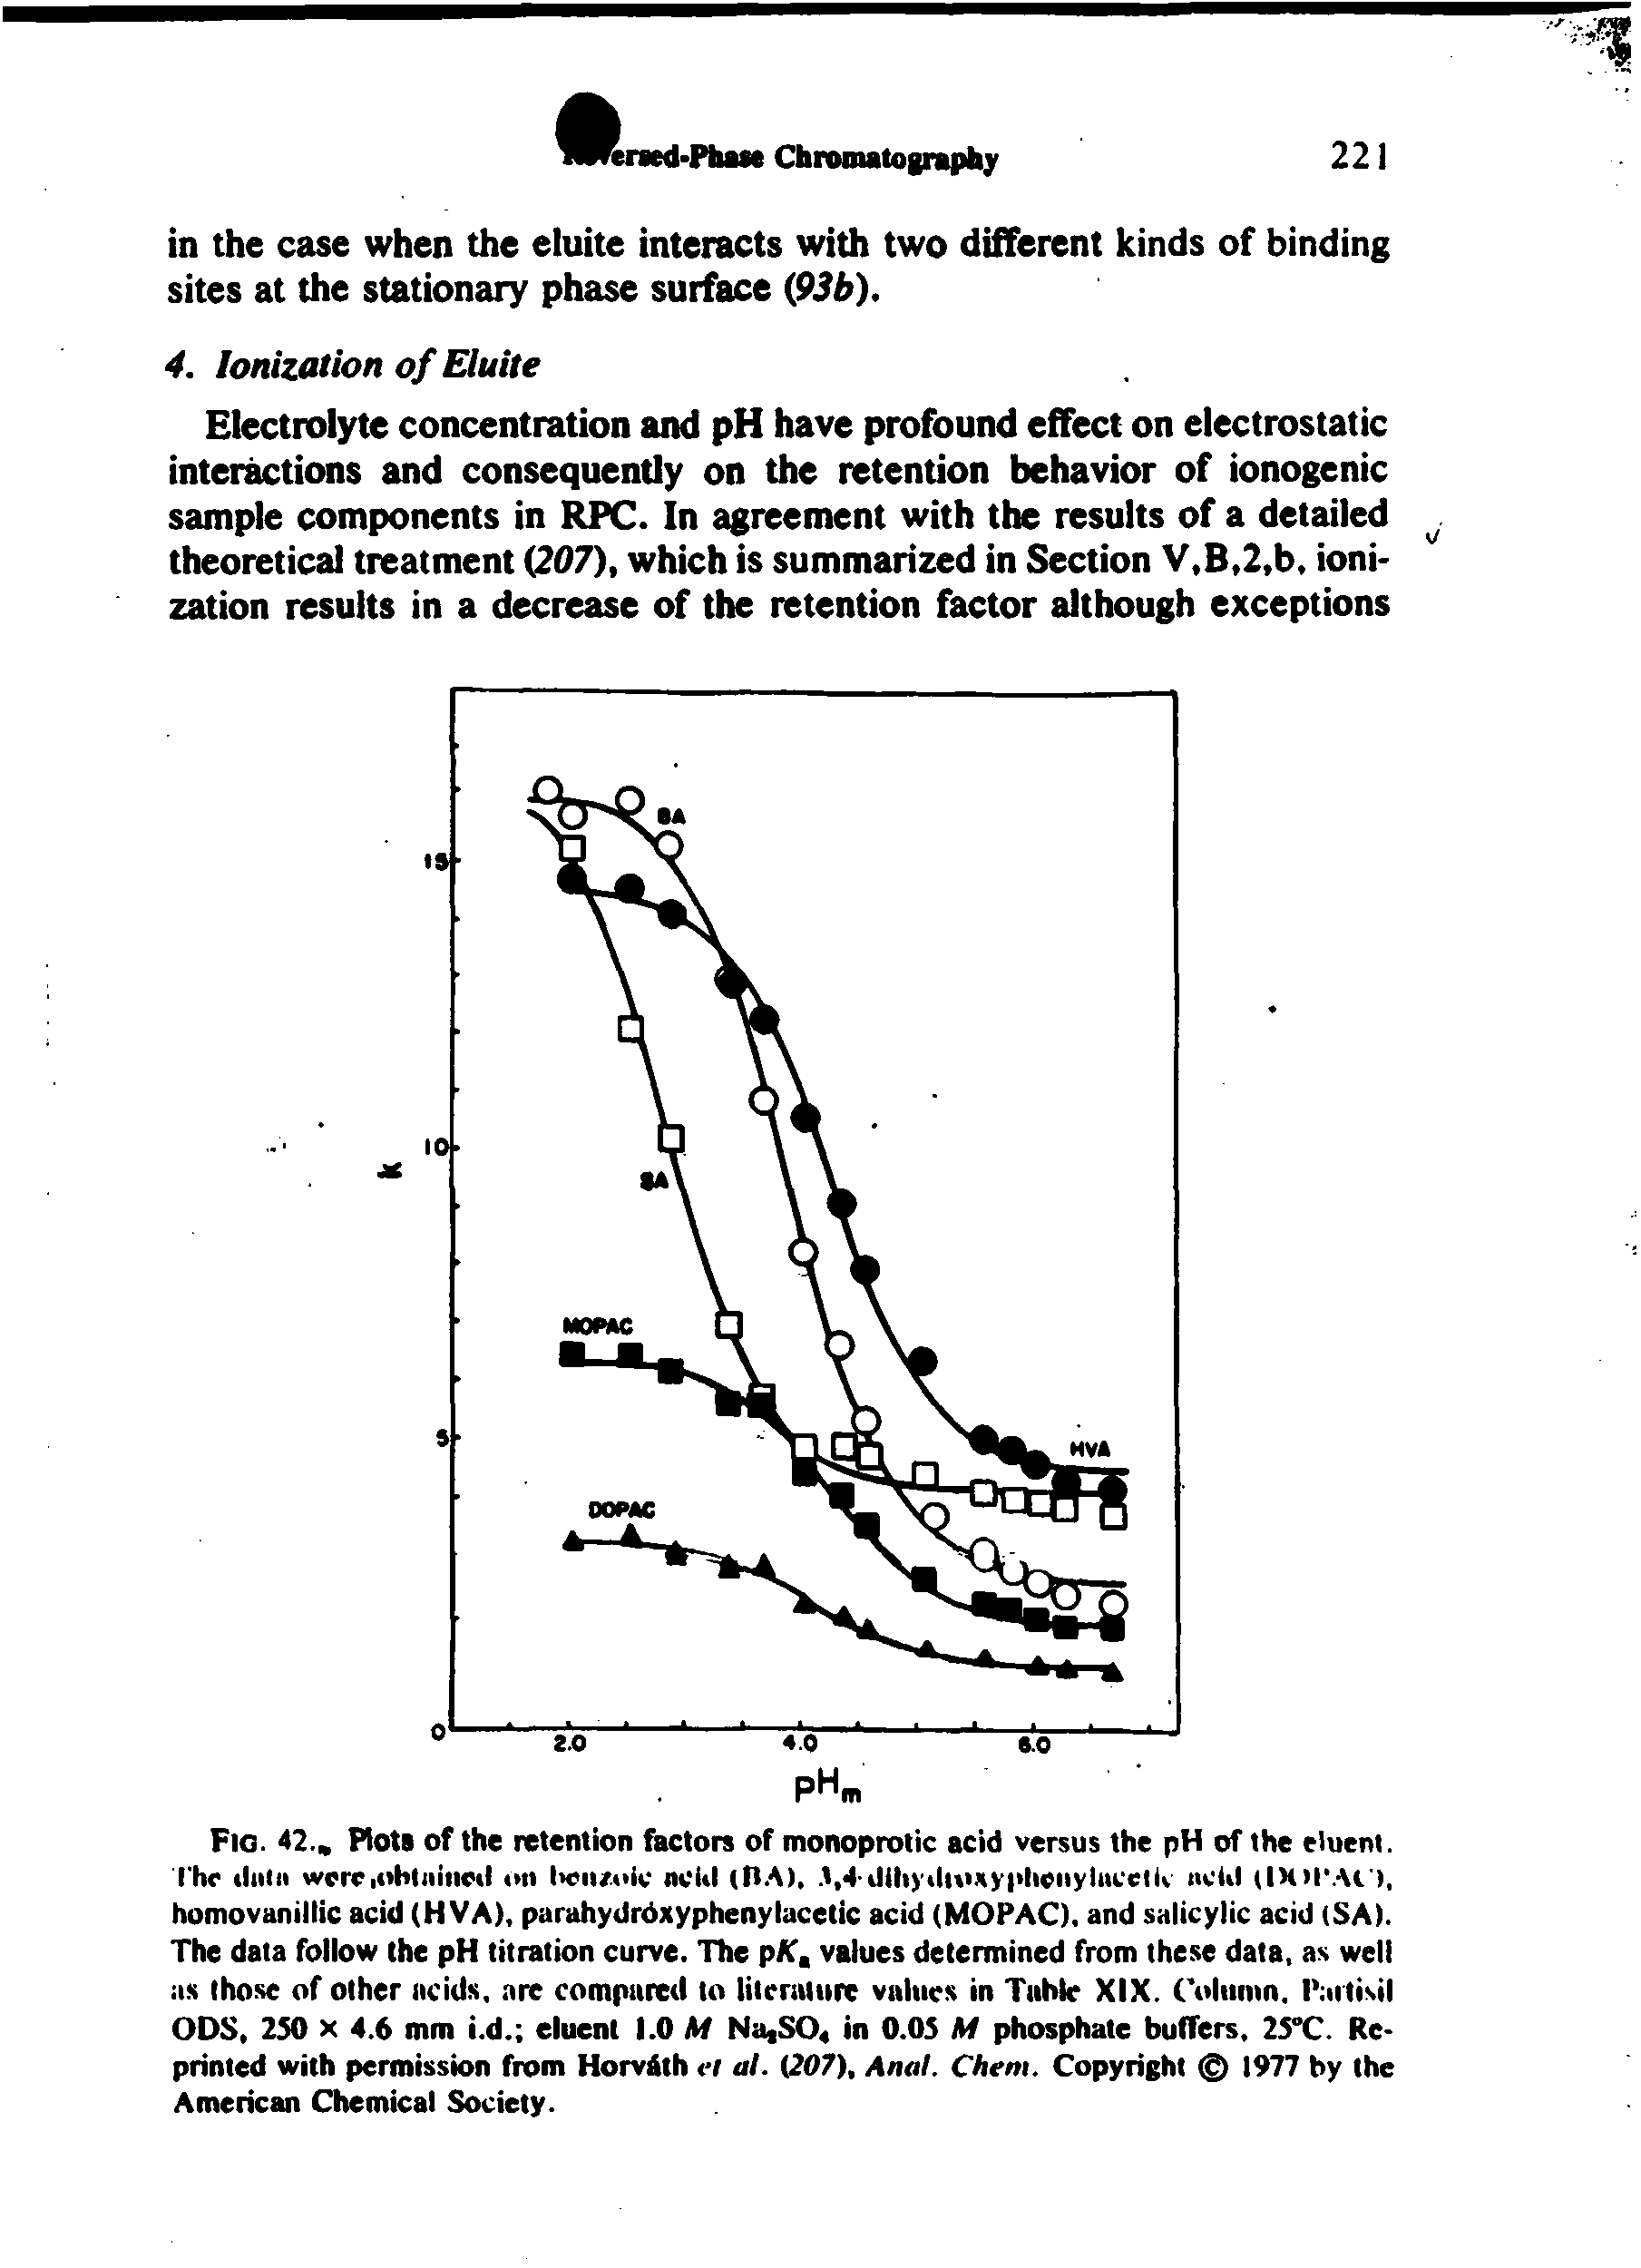 Fig. 42., Flota of the retention foctors of monoprotic acid versus the pH of the eluent, rhr iliilii wcrciohliiiiicil on l<eii/.ok ncUl (tt.M,. 1,4-Jitiyiliosyplicnylucelli ncUl (IH)I. M ), homovanillic acid (HVA), parahydrdxyphenylacetic acid (MOPAC), and salicylic acid (SA). The data follow the pH titration curve. The pAT. values determined from these data, as well as those of other acids, are compared to literuturc values in Tiihte XIX. Column. Partisil ODS, 250 X 4.6 mm i.d. eluent 1.0 M Na,SO in O.OS M phosphate buffers, 2S°C. Reprinted with permission from Horvdih ei at. Q07), Anal. Chem. Copyright 1977 by the American Chemical Society.